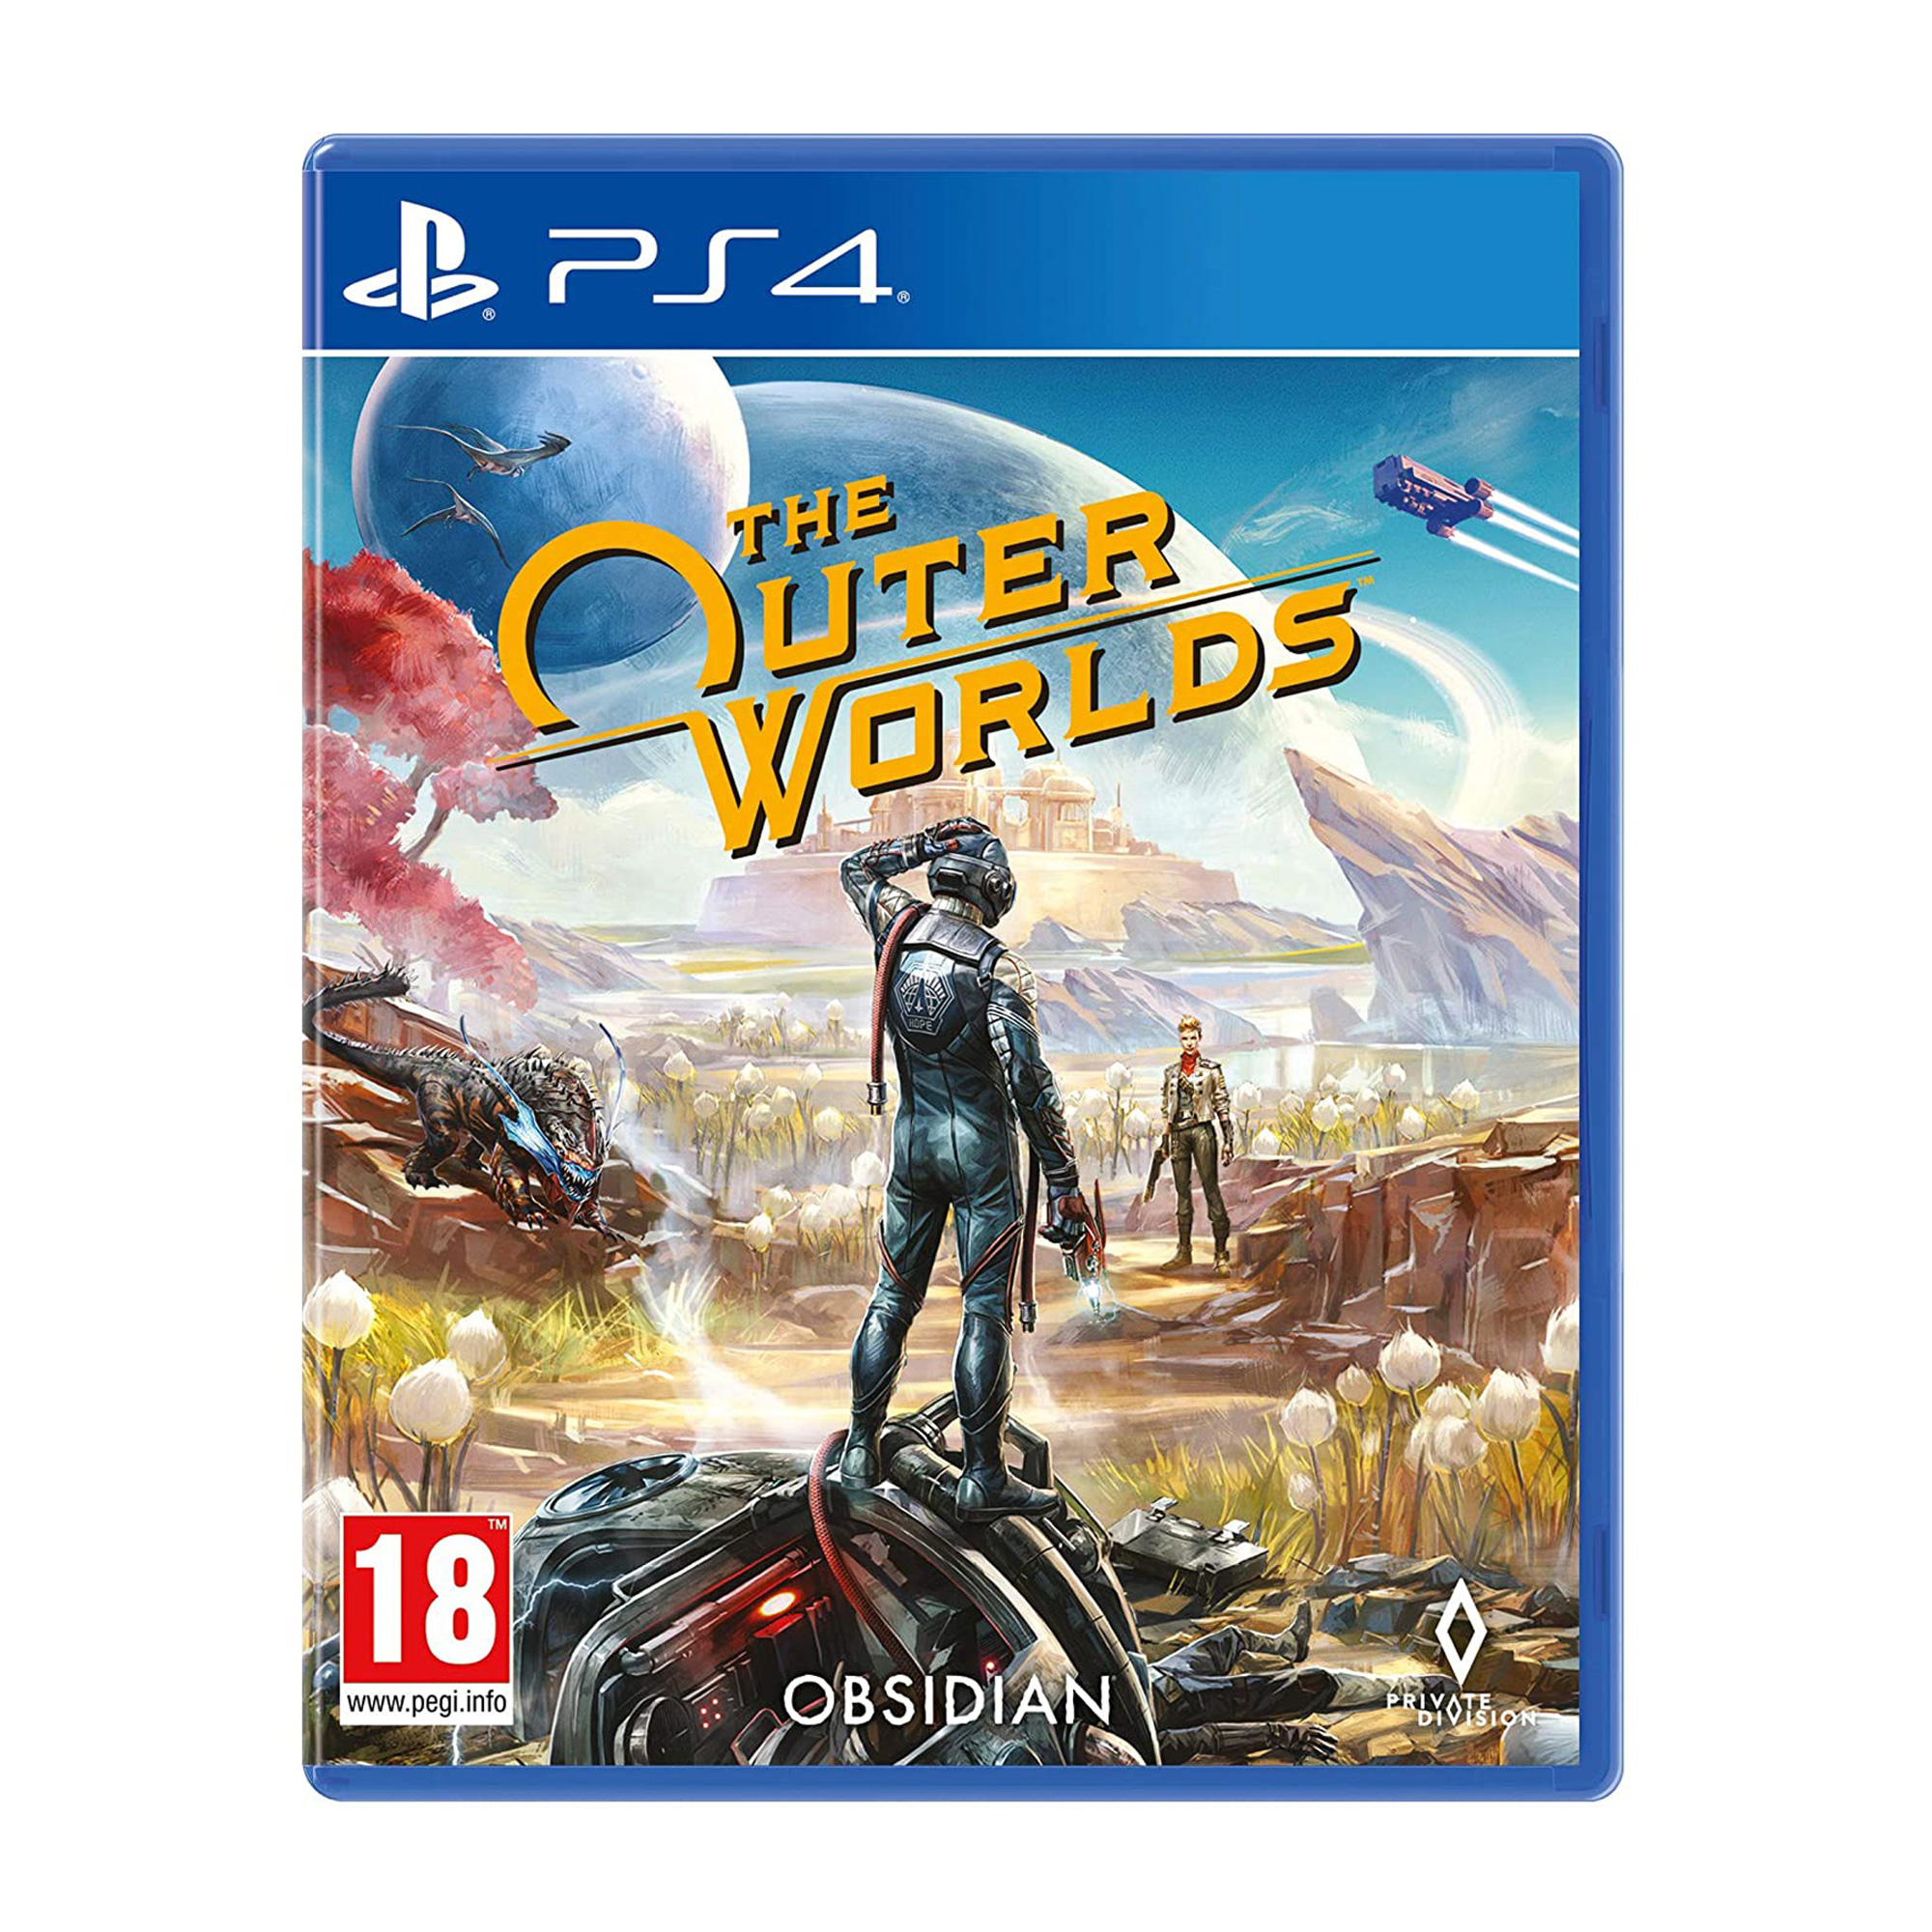 Igra za PS4 The Outer Worlds